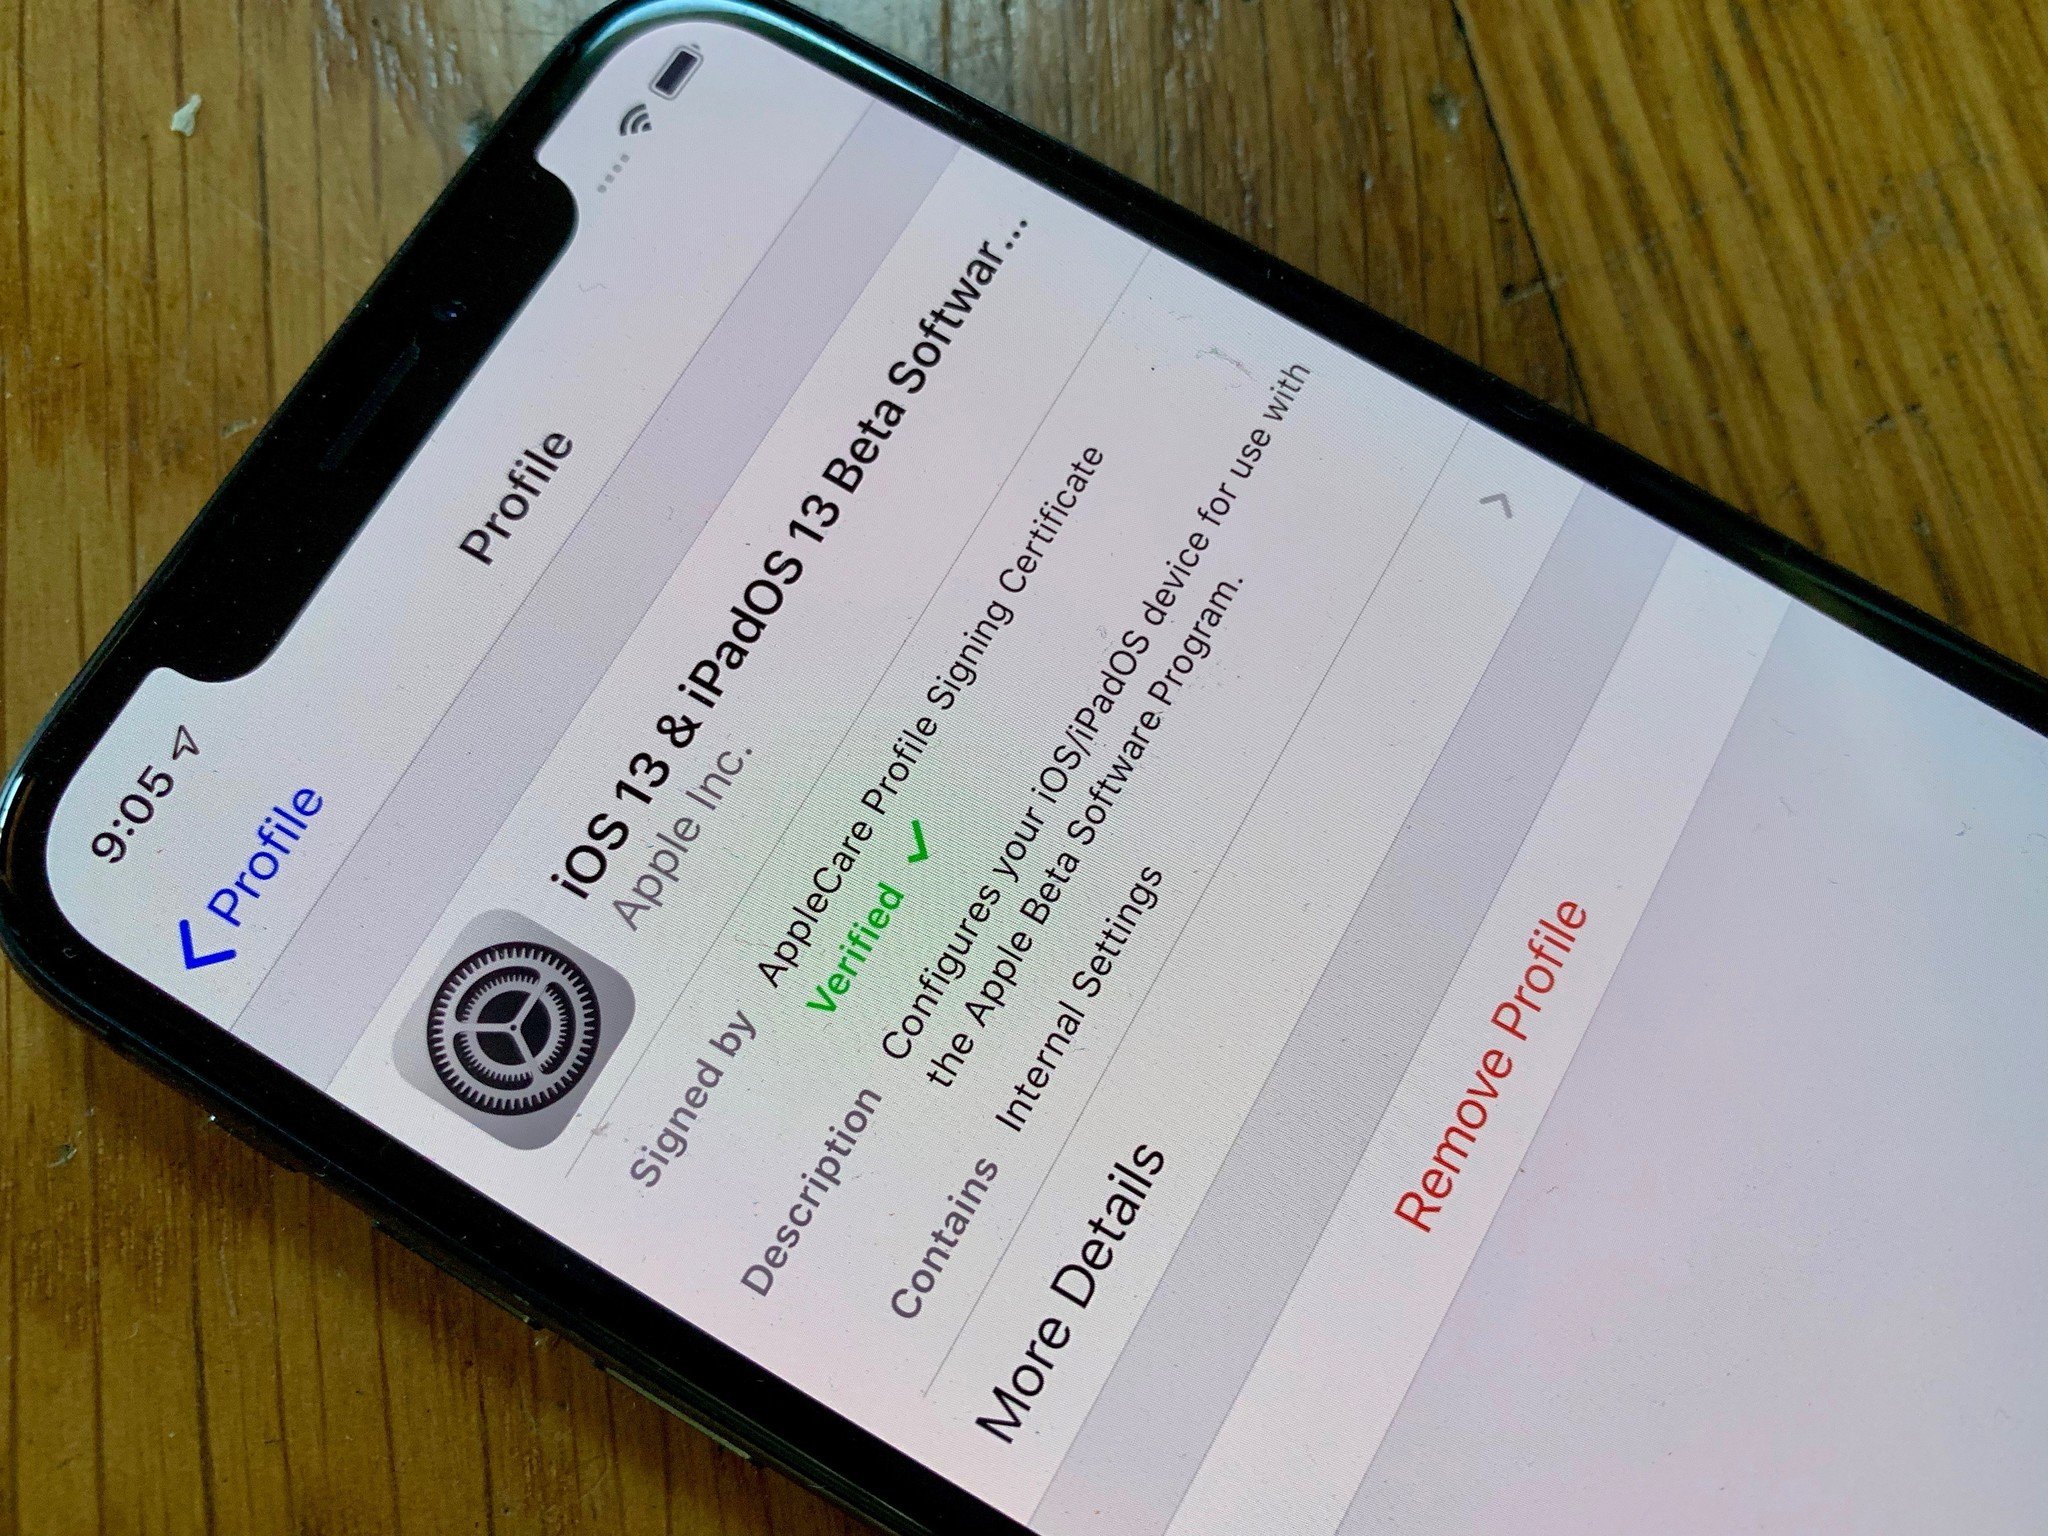 Indeholde Biprodukt Vær modløs The risks of jailbreaking your iPhone outweigh any benefits | iMore